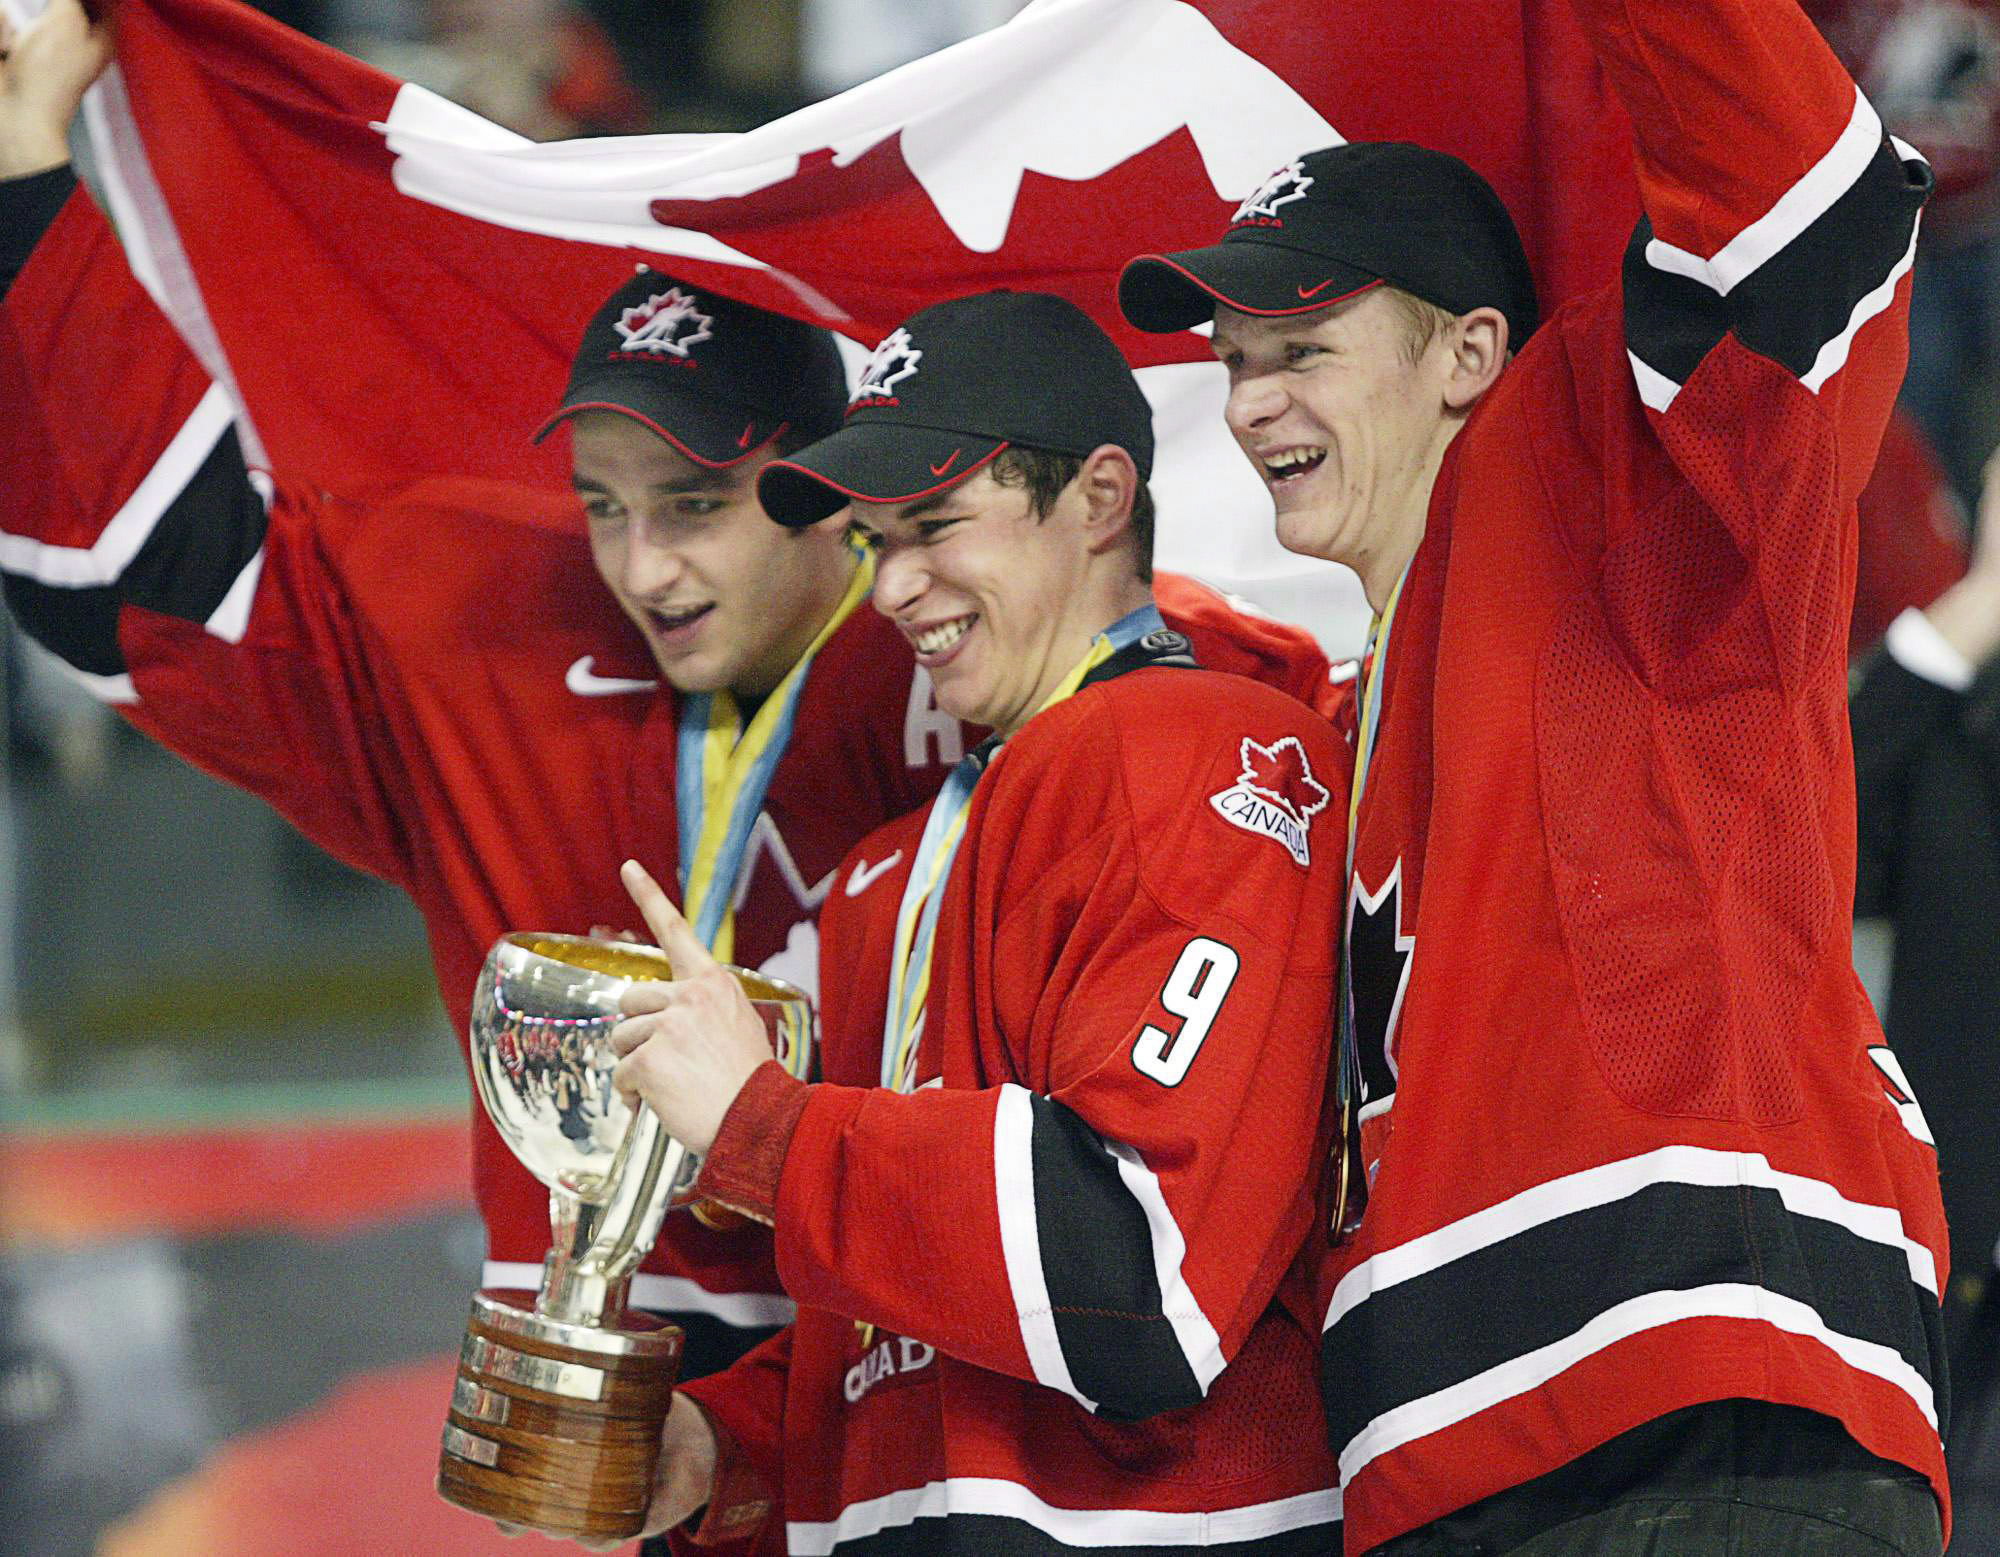 World Juniors: Remembering the 2005 All-Star team - Team Canada